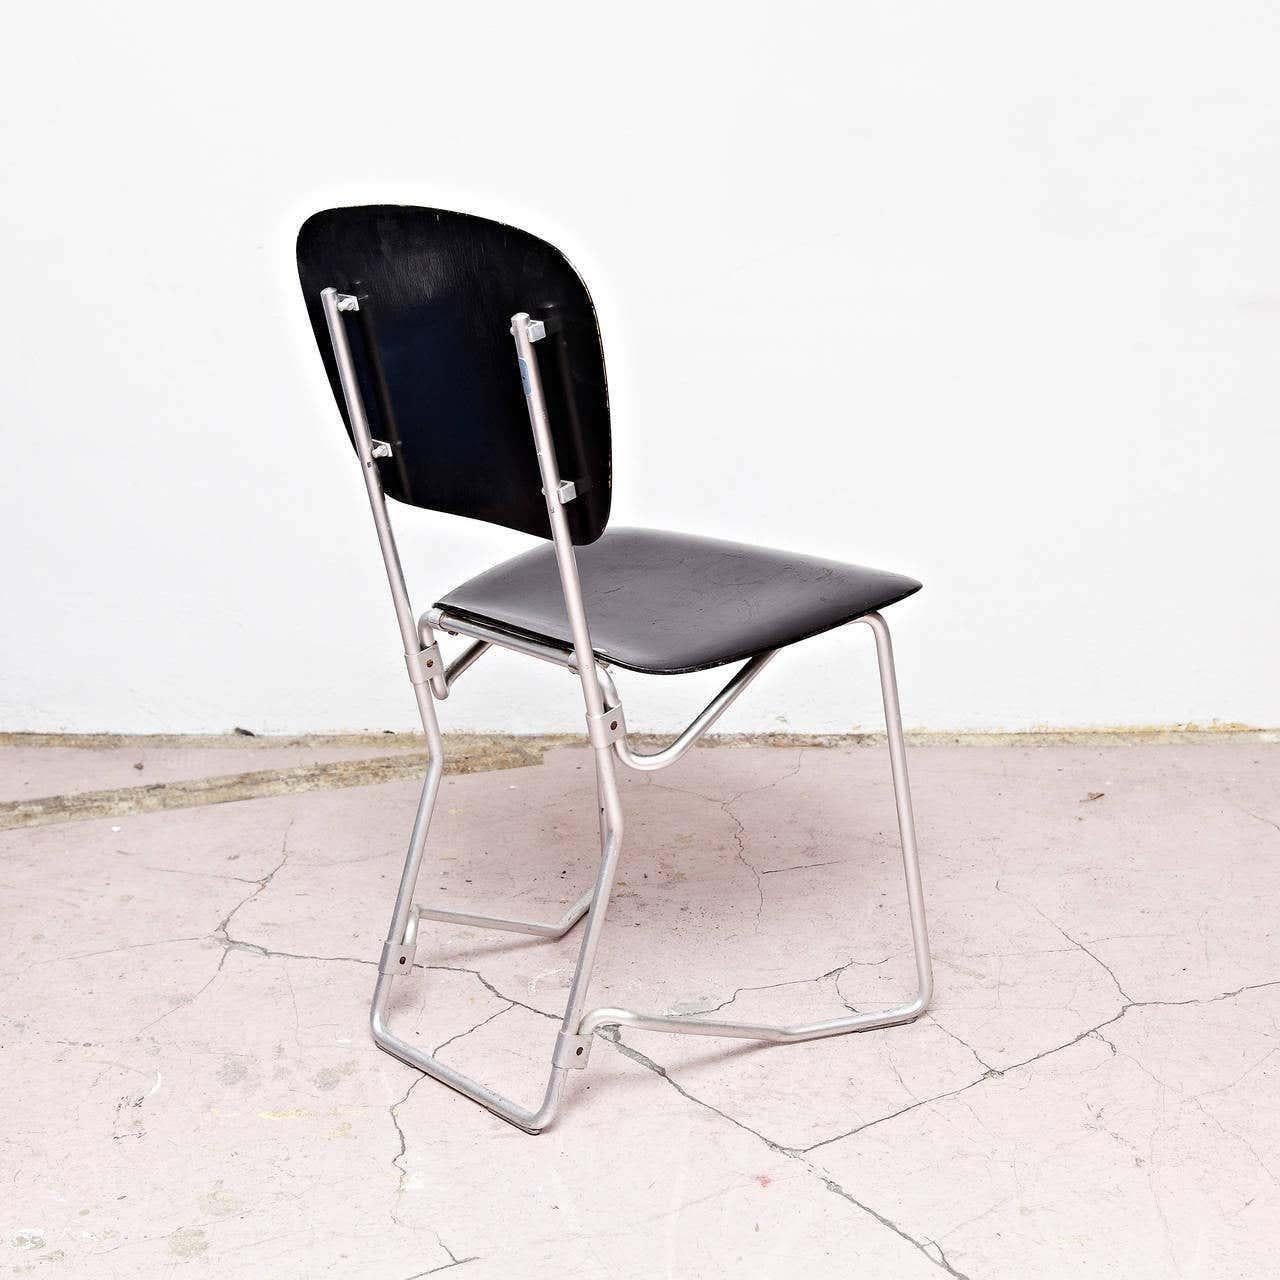 Mid-20th Century Armin Wirth Mid-Century Modern Metal and Wood Swiss Stackable Chairs for Aluflex For Sale